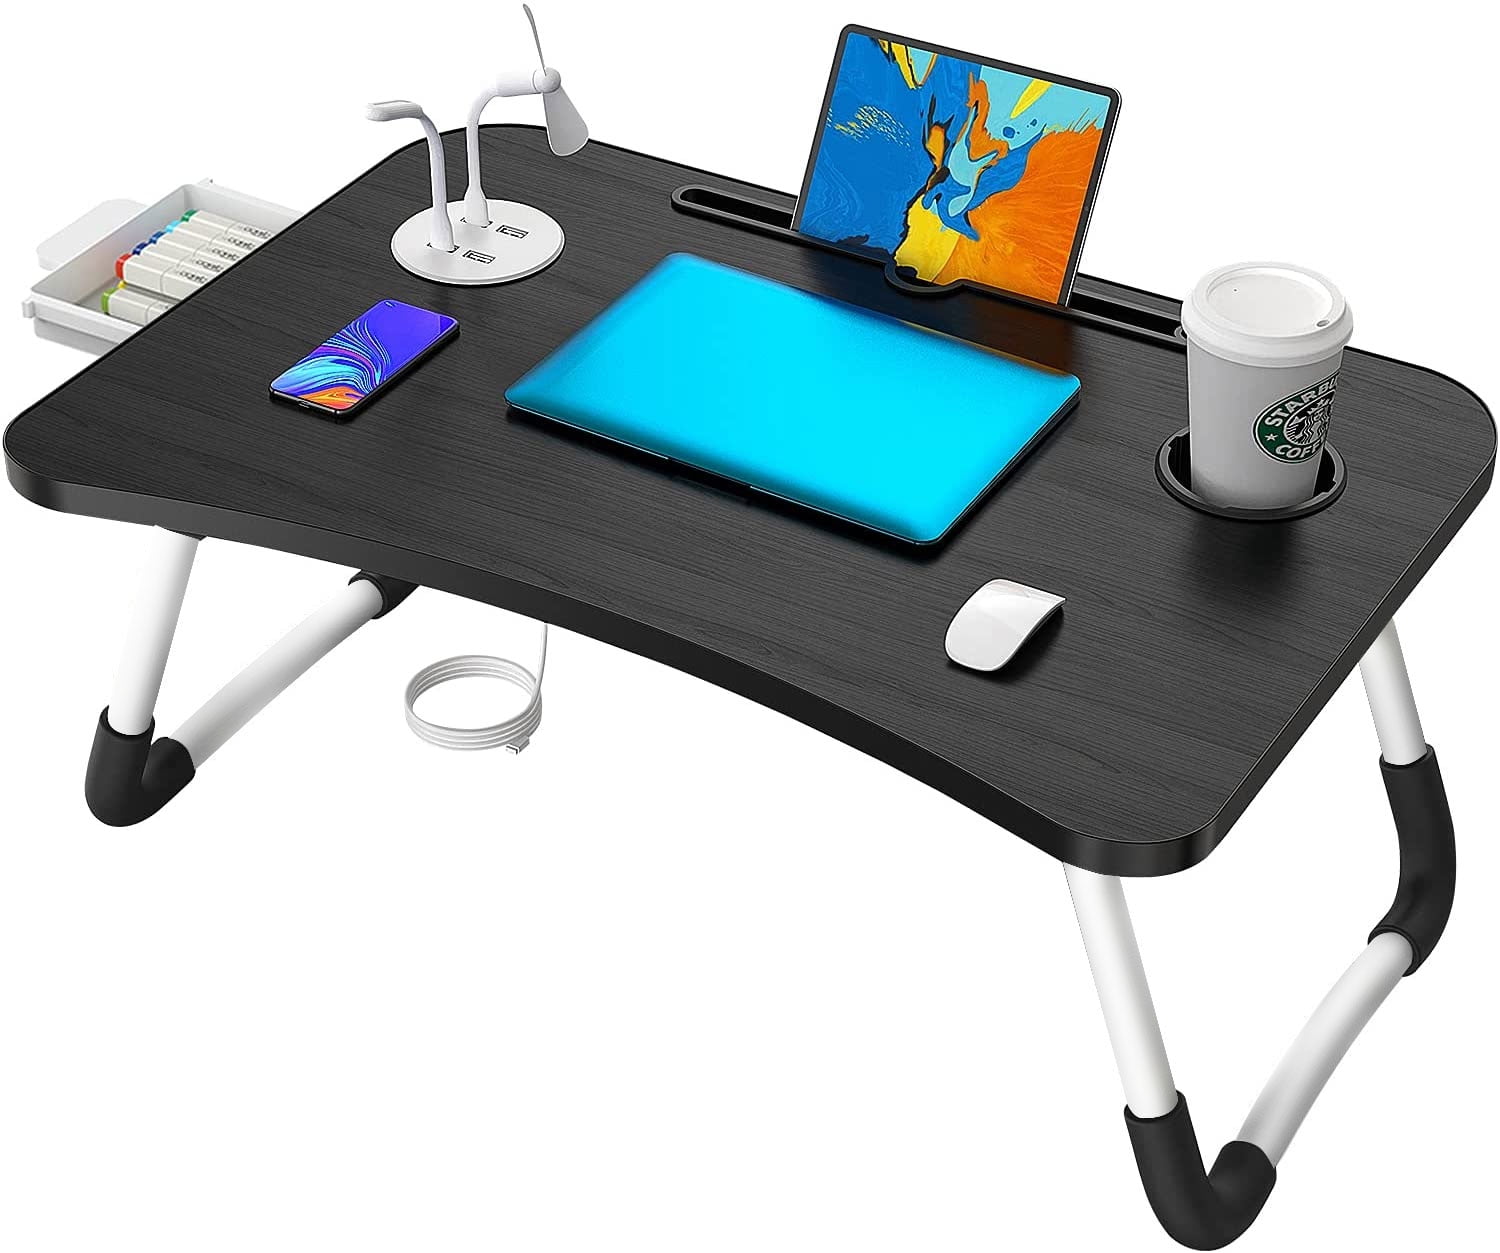 Stable Lap Table TV Tray Cup Holder Reading Writing Beanbag Bottom Travel Blue 